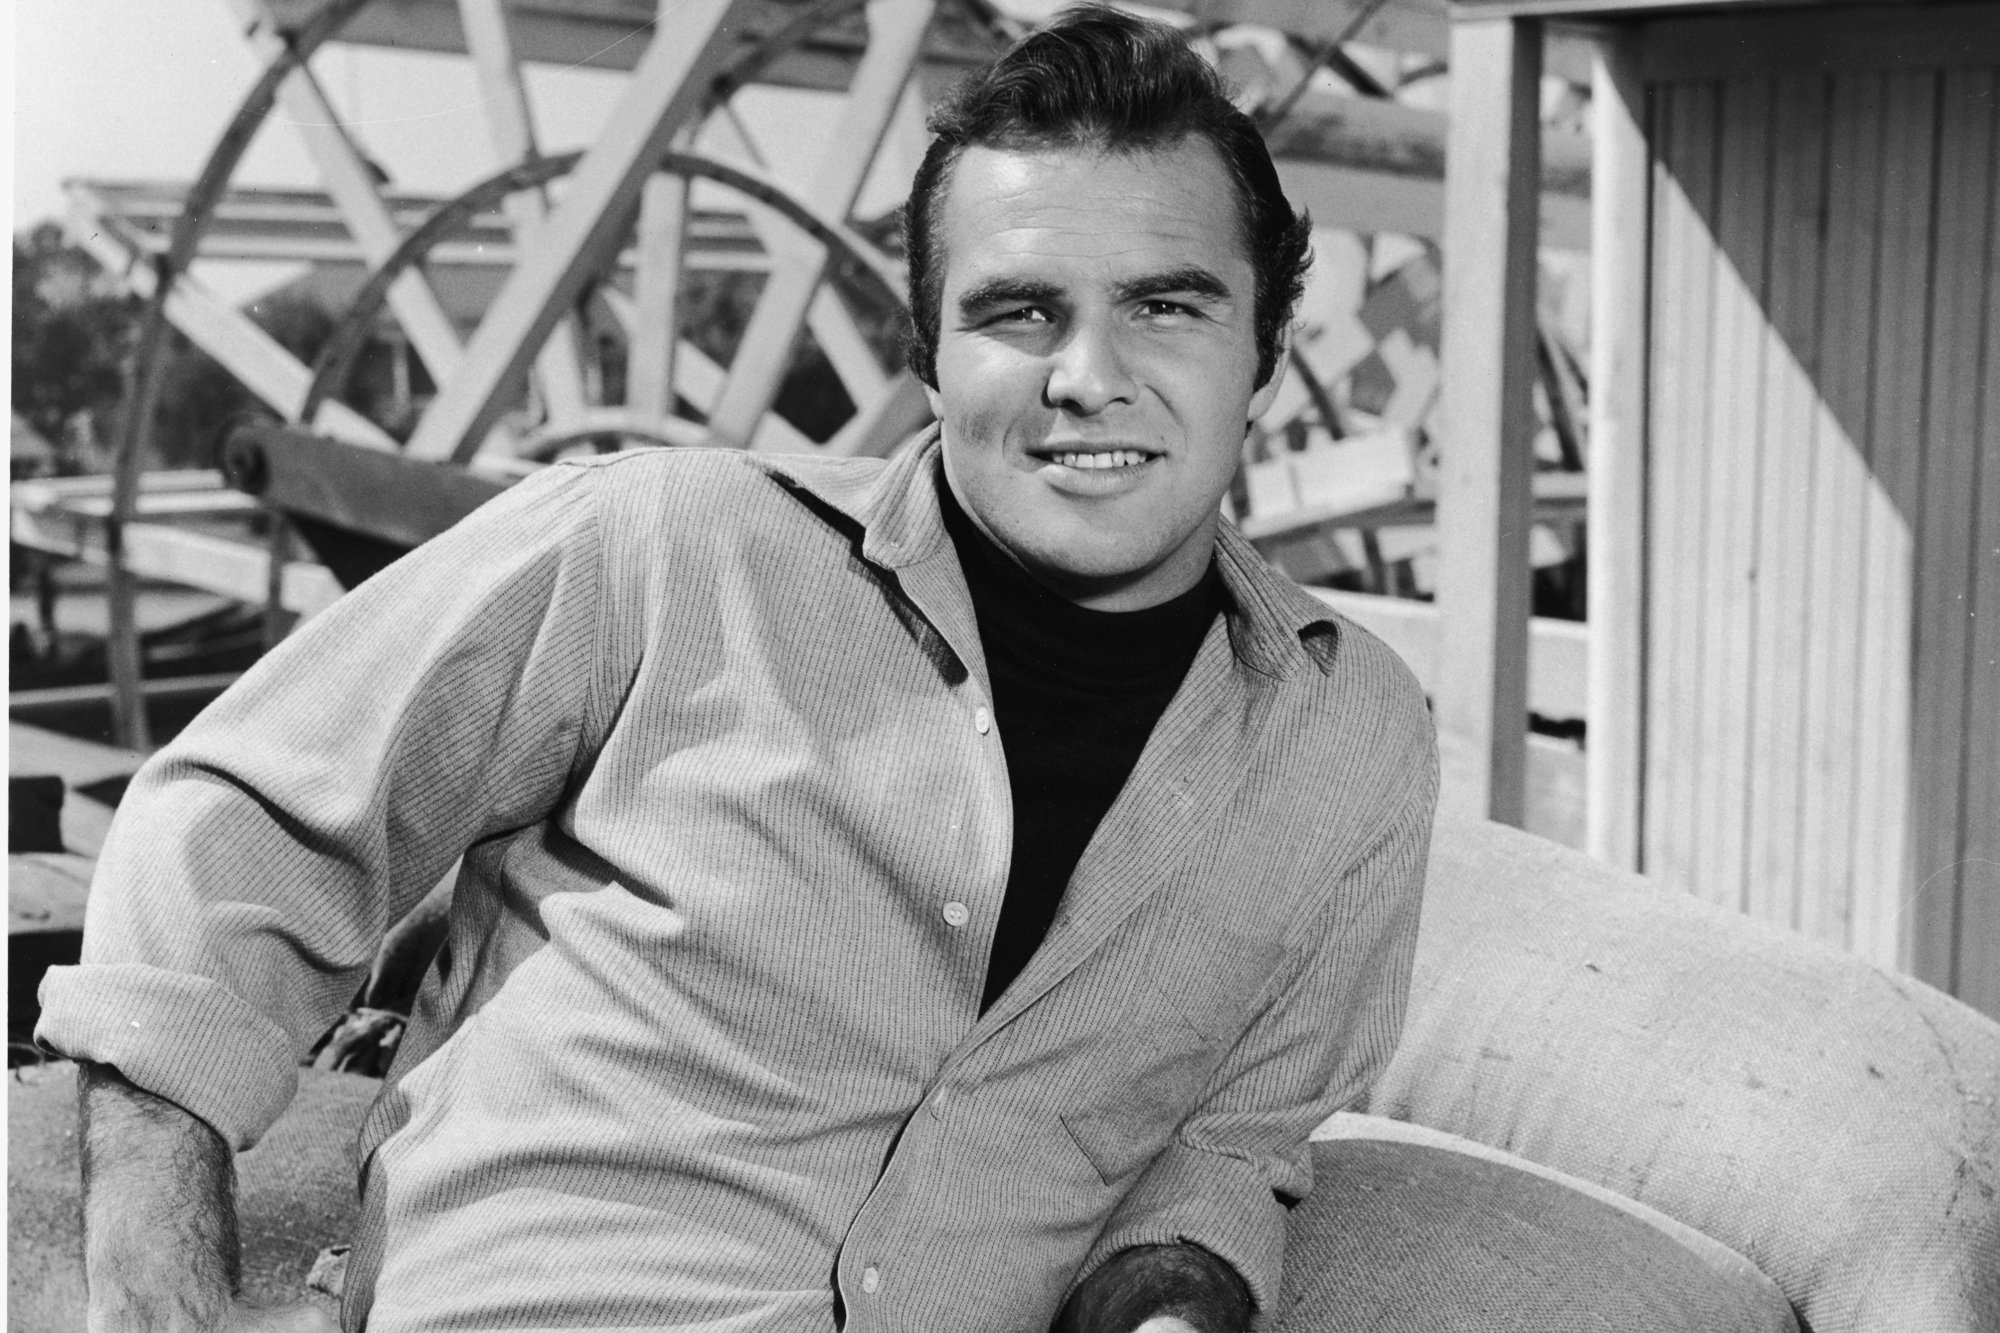 'Gunsmoke' actor Burt Reynolds on 'Riverboat' set smiling in a button-up shirt and leaning on sandbags